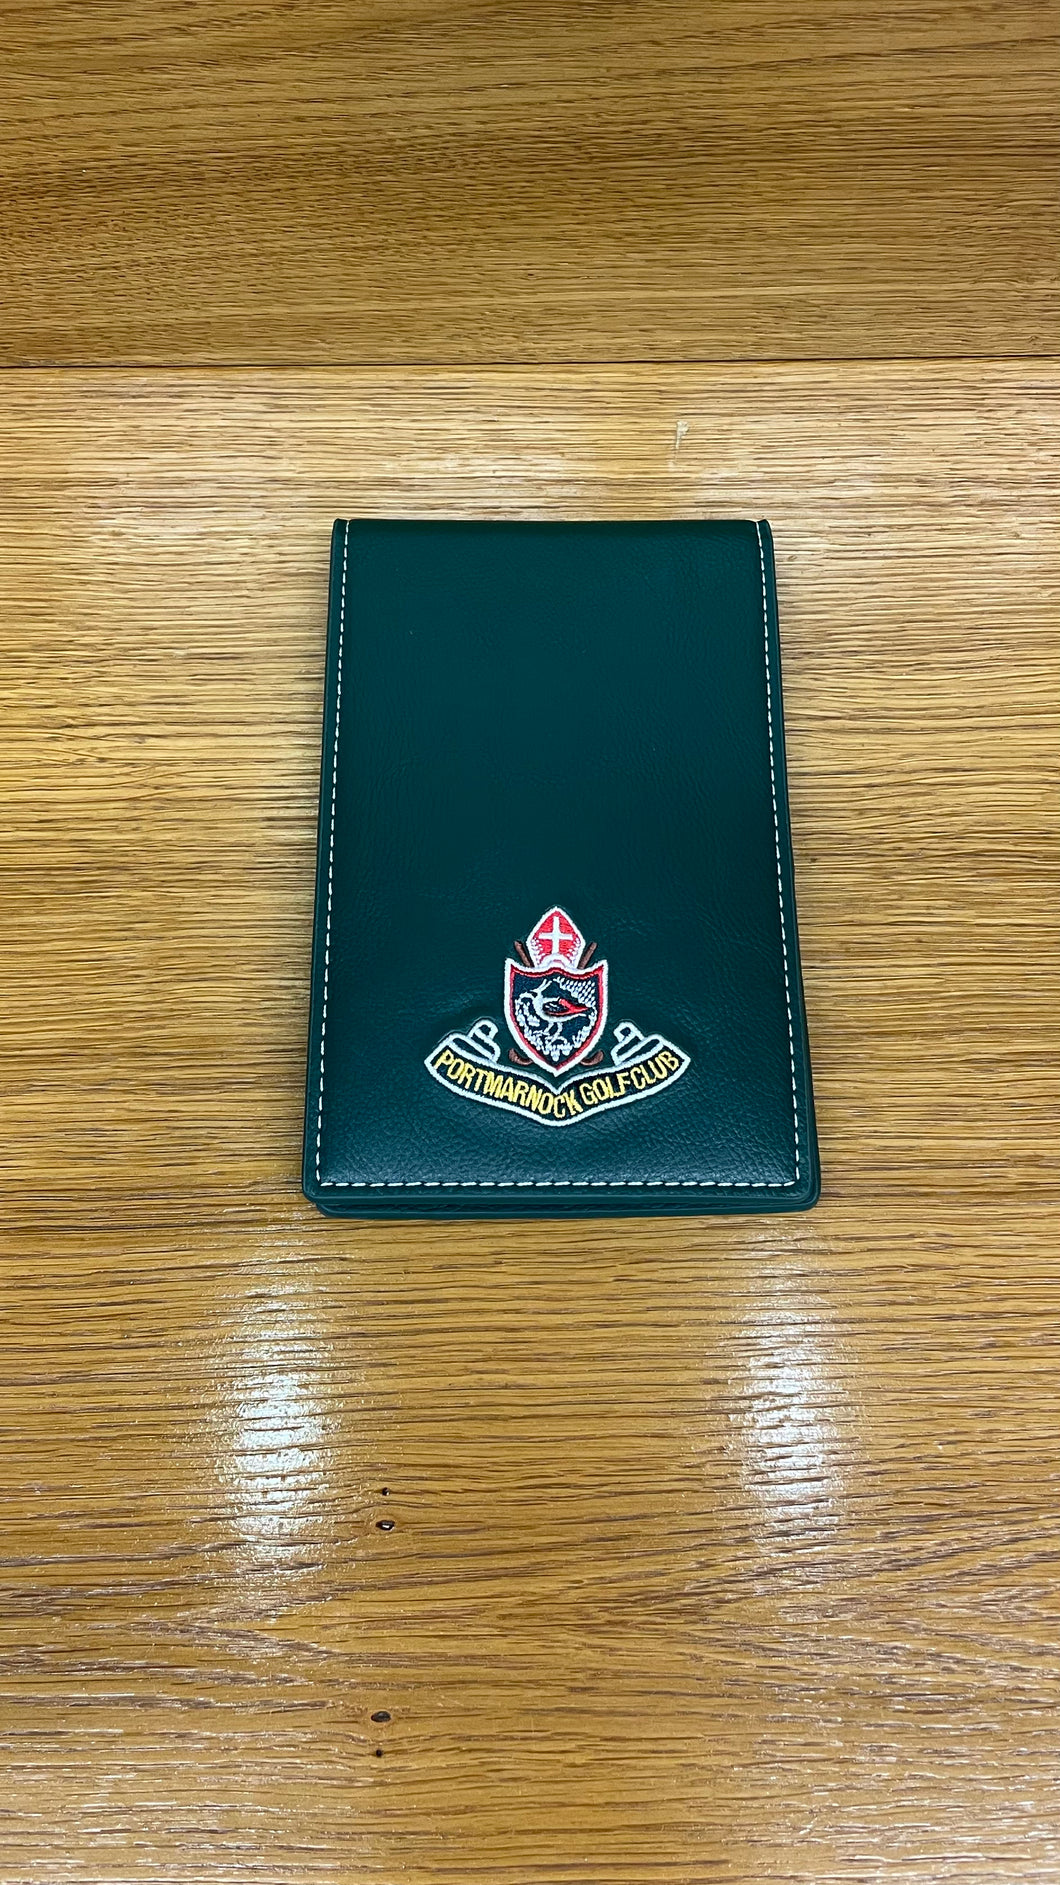 PRG Yardage Book Cover